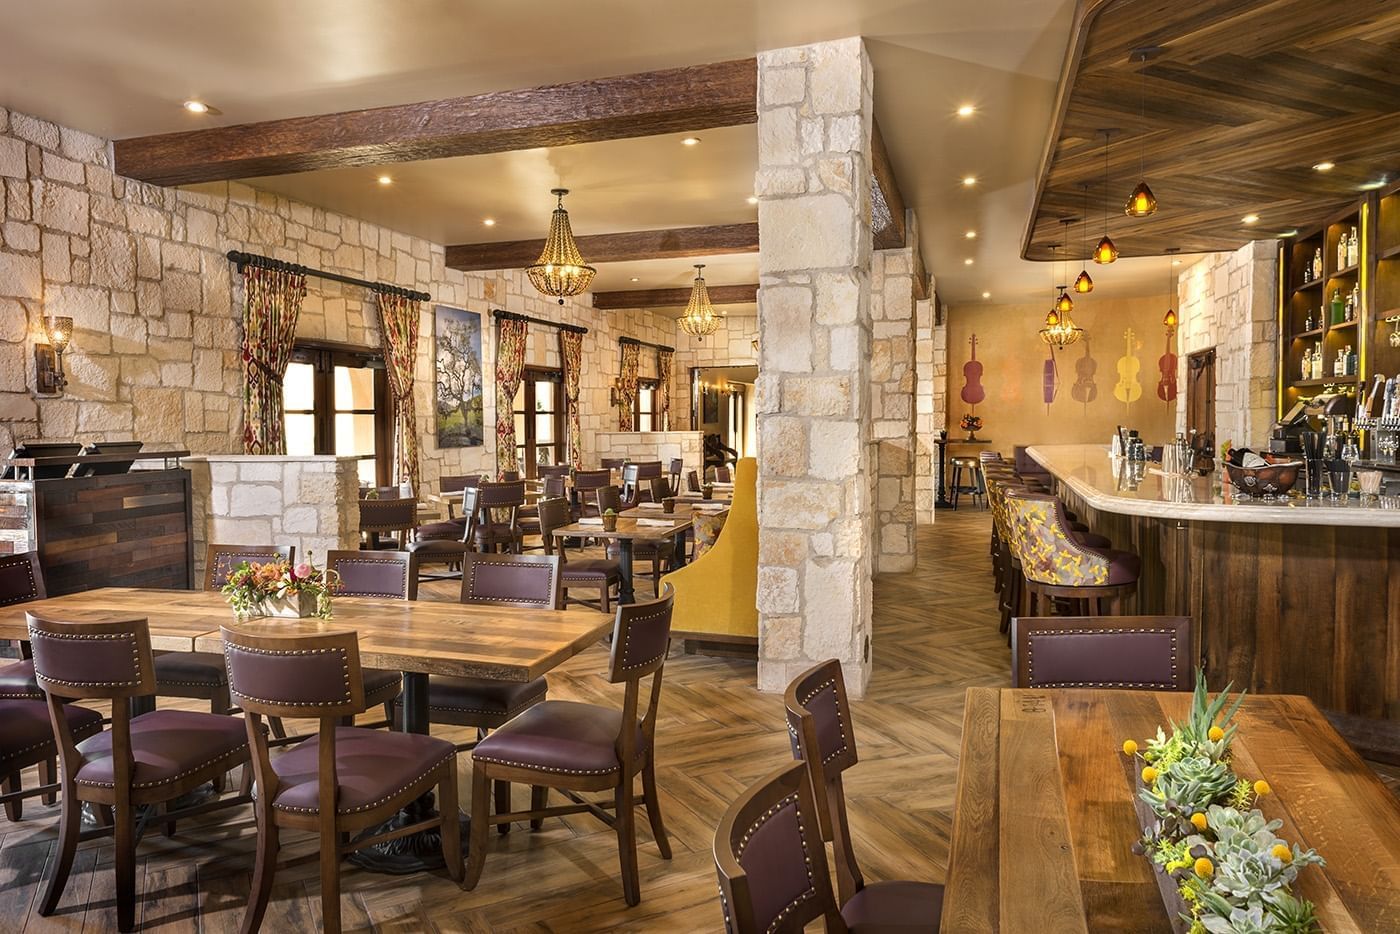 Looking through the Cello Restaurant with stone walls and wood b